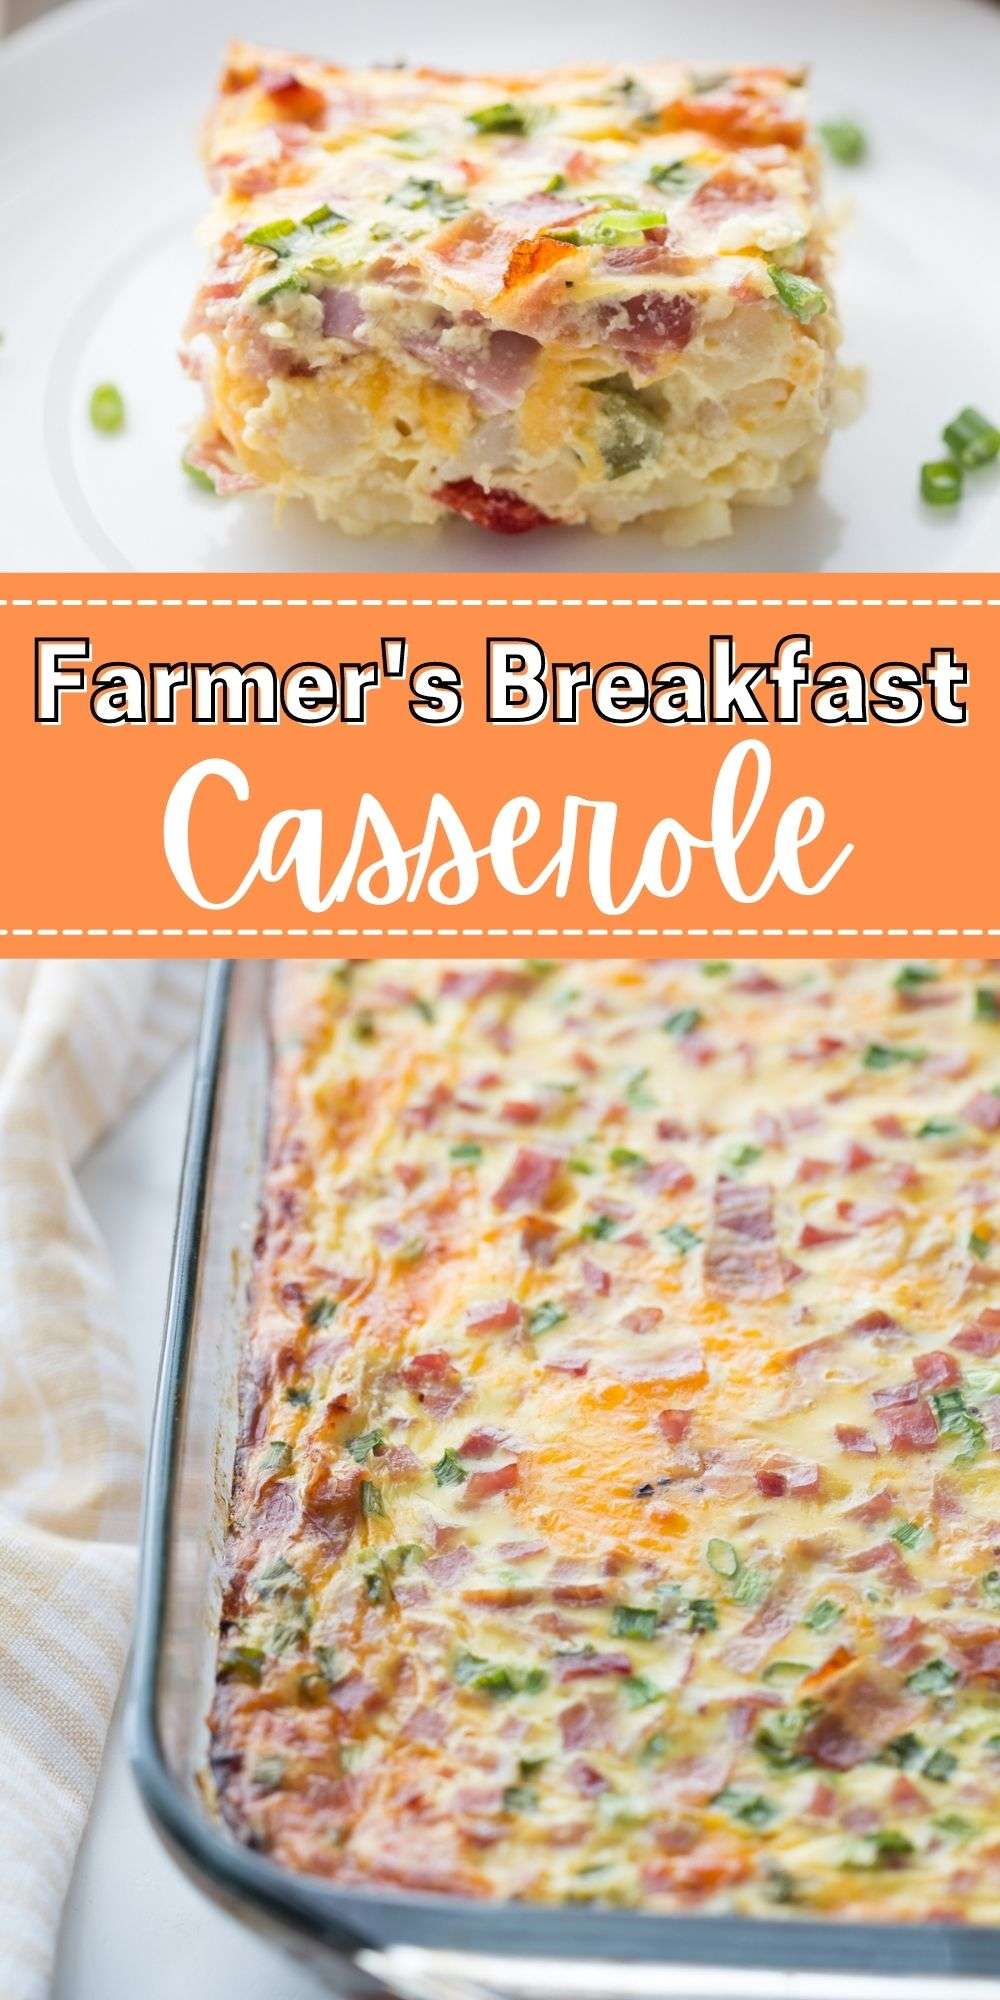 This Farmer’s Breakfast Casserole is the perfect way to start off that kind of day. It’s got all the ingredients of a hearty farmer’s breakfast. via @familyfresh